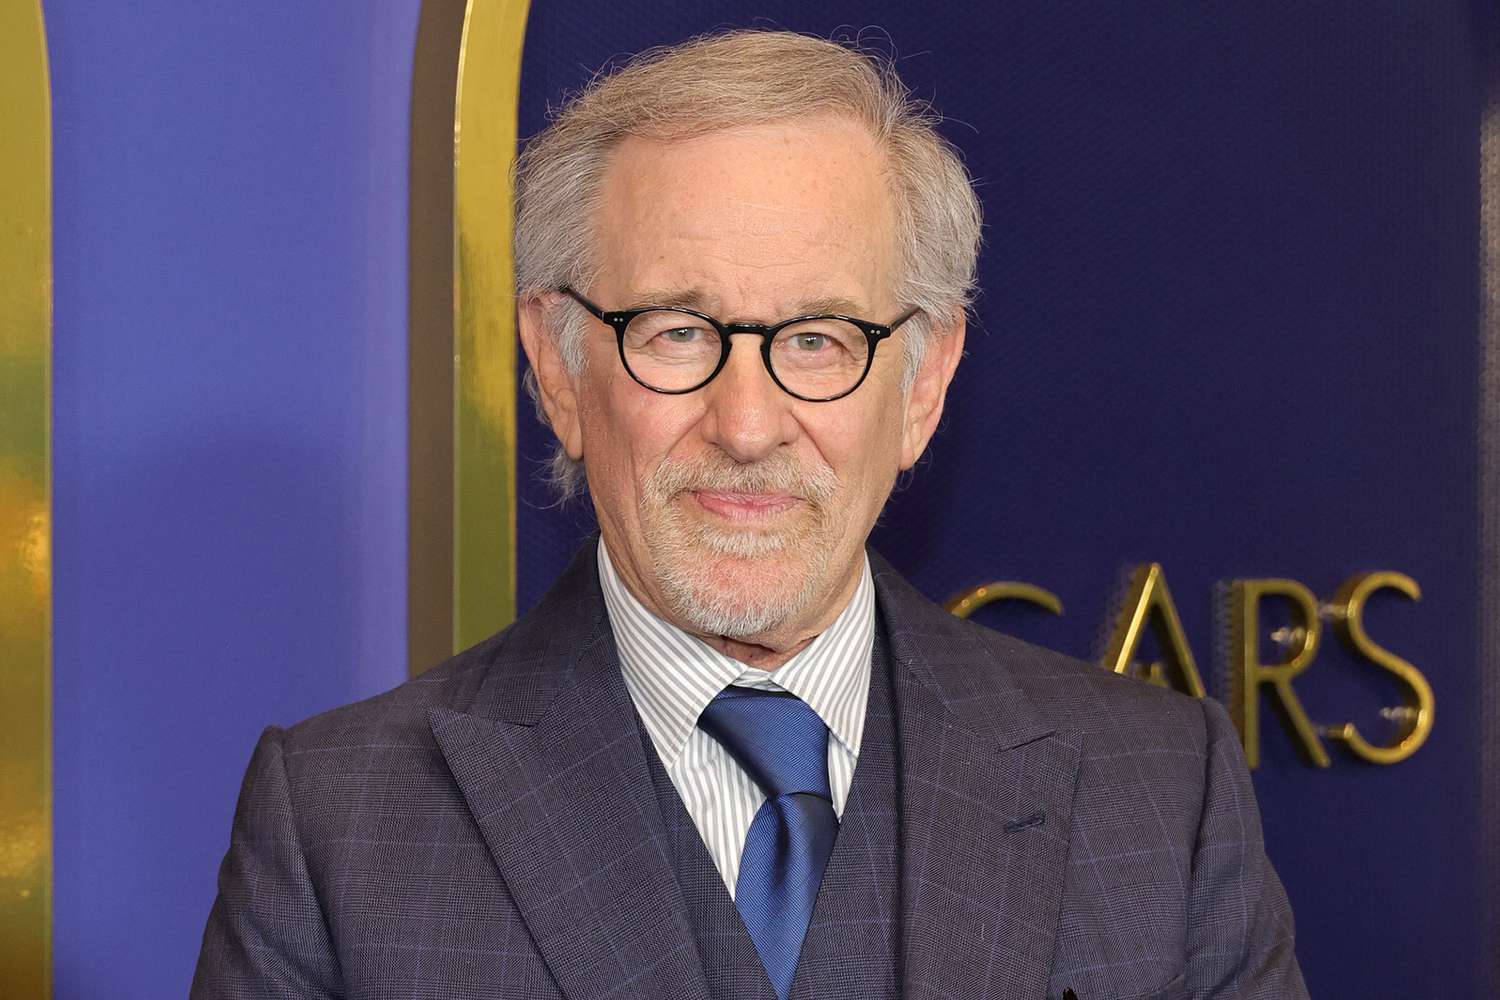 Steven Spielberg attends the 94th Annual Oscars Nominees Luncheon at Fairmont Century Plaza on March 07, 2022 in Los Angeles, California.